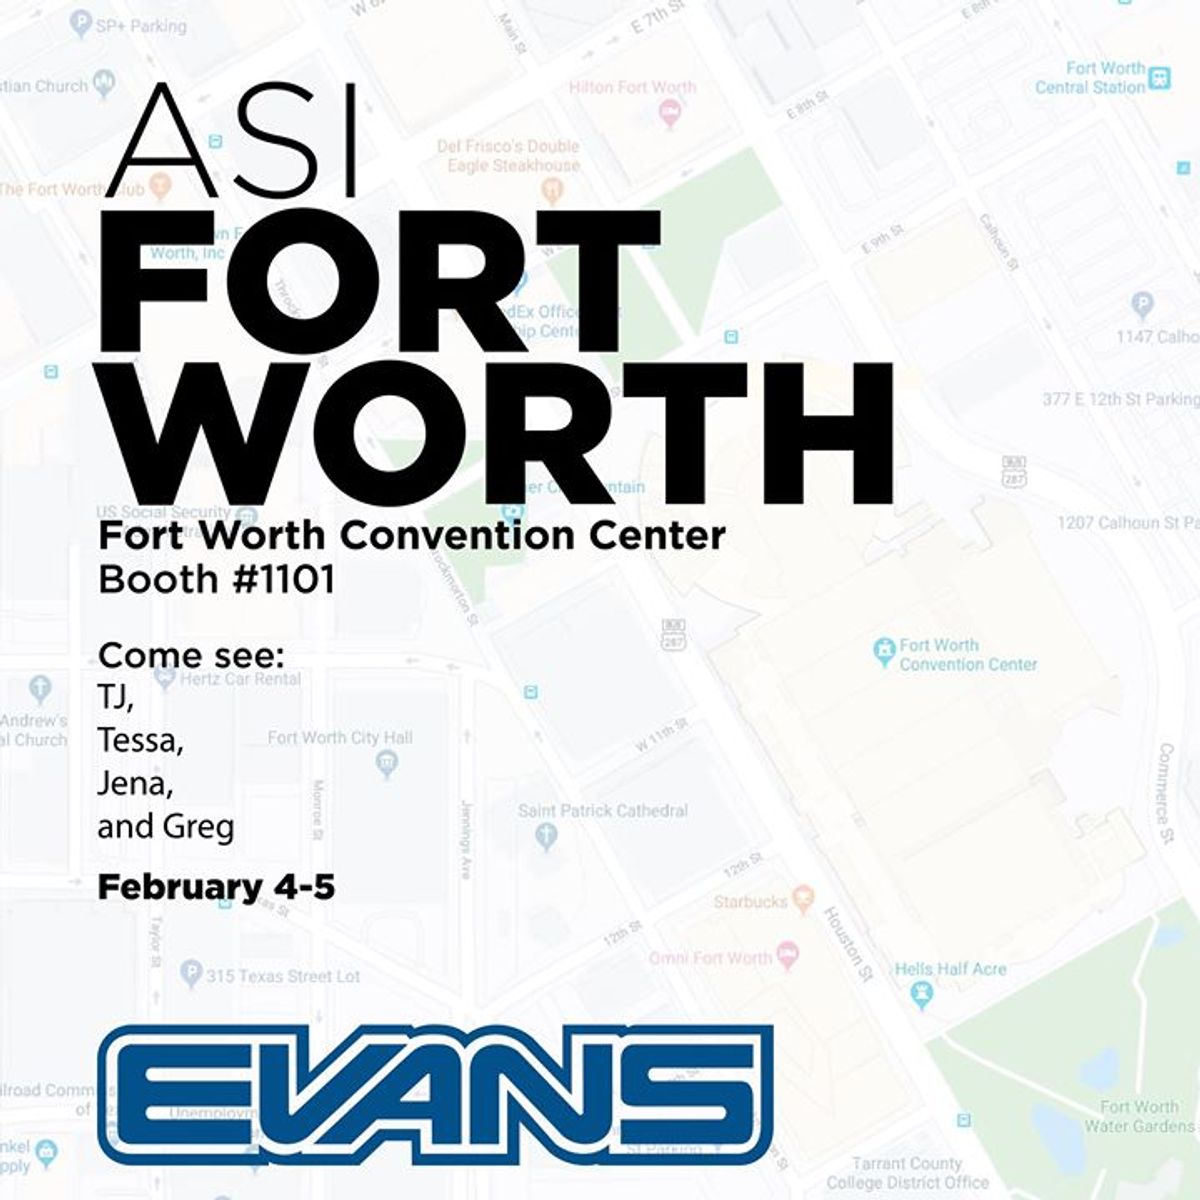 Will you be at ASI Fort Worth? Come see Evans Manufacturing HPG